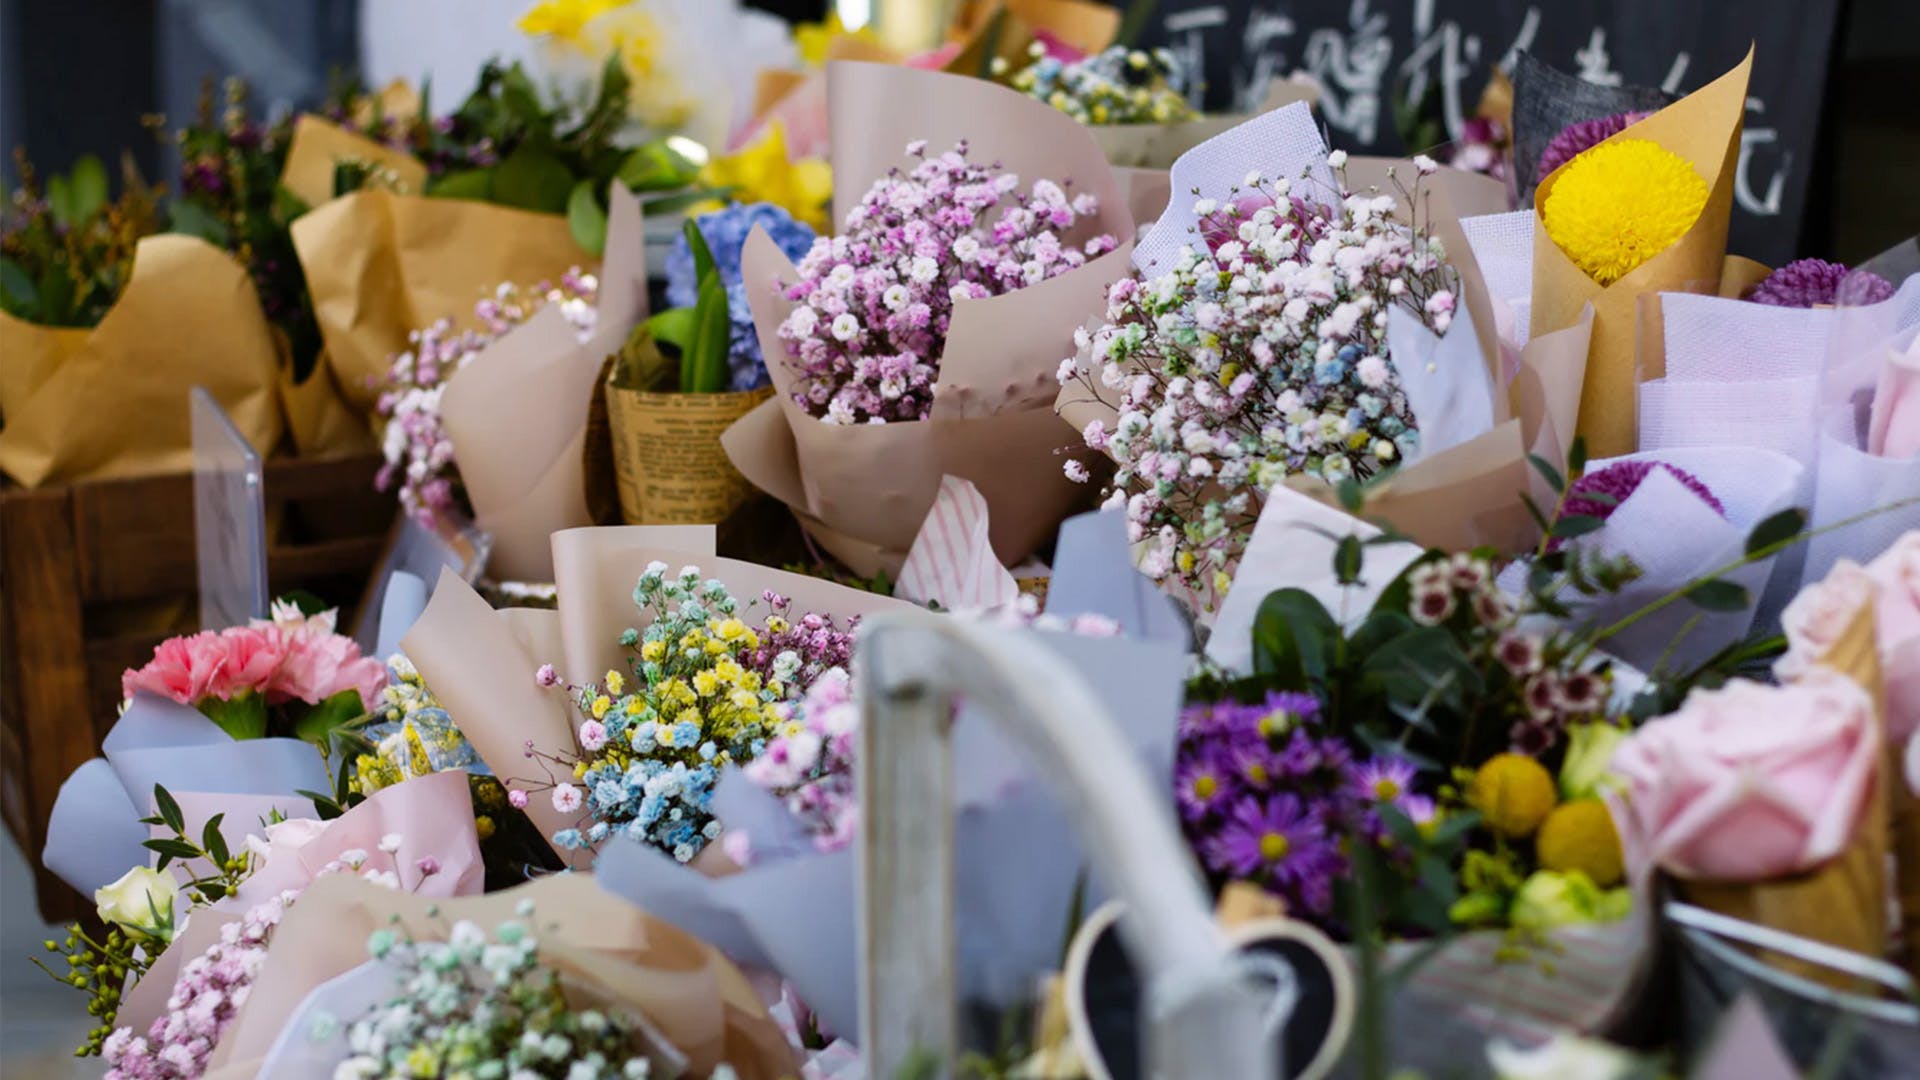 Make your life bloom by just one click with an Online Florist